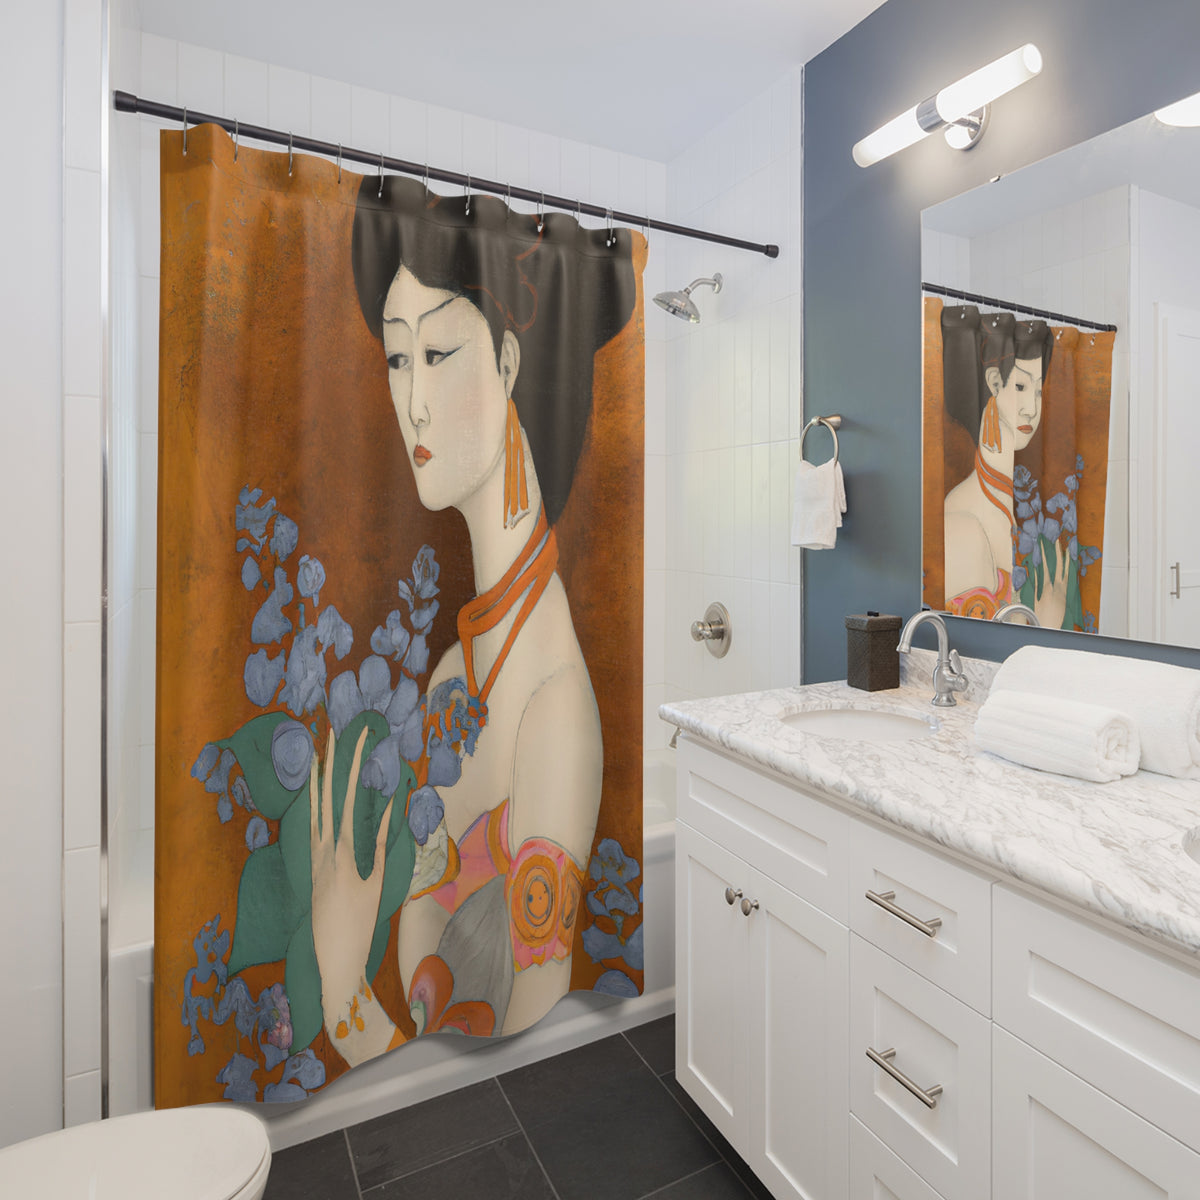 bathroom view with a shower curtain of a painted image of a Geisha holding some violets